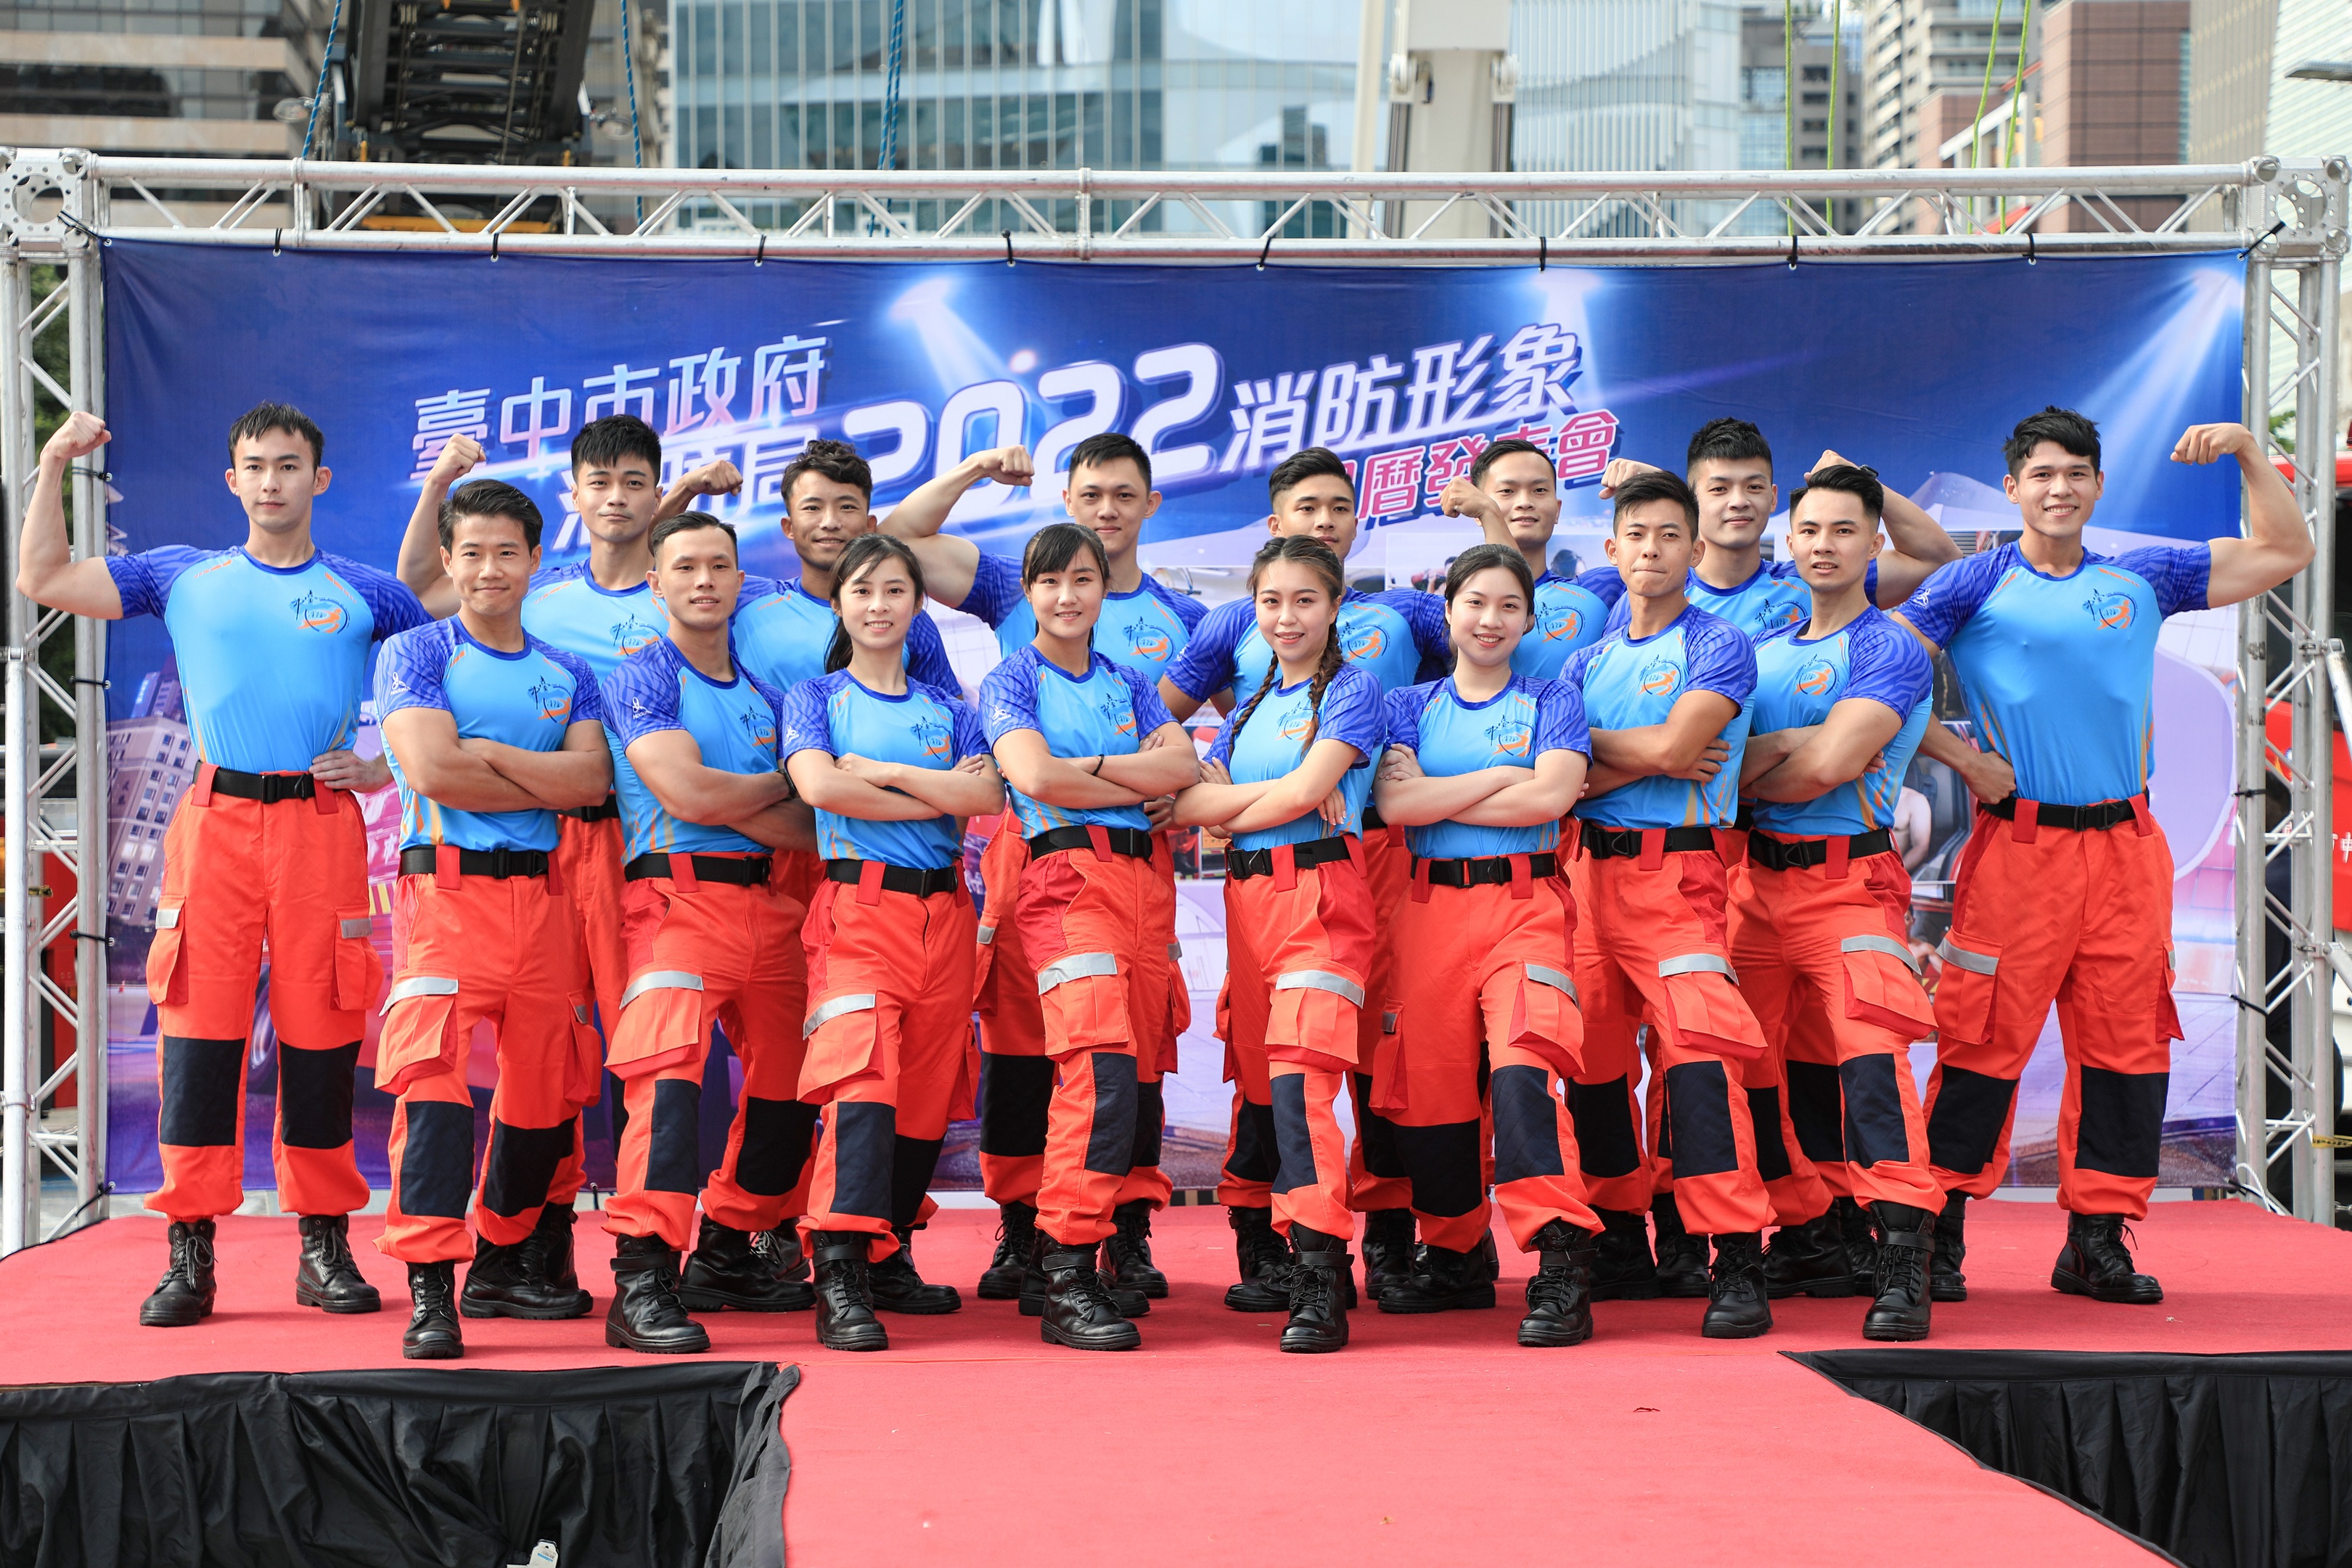 2022 Firefighter Calendar. (Photo / Provided by the Taichung City Government)